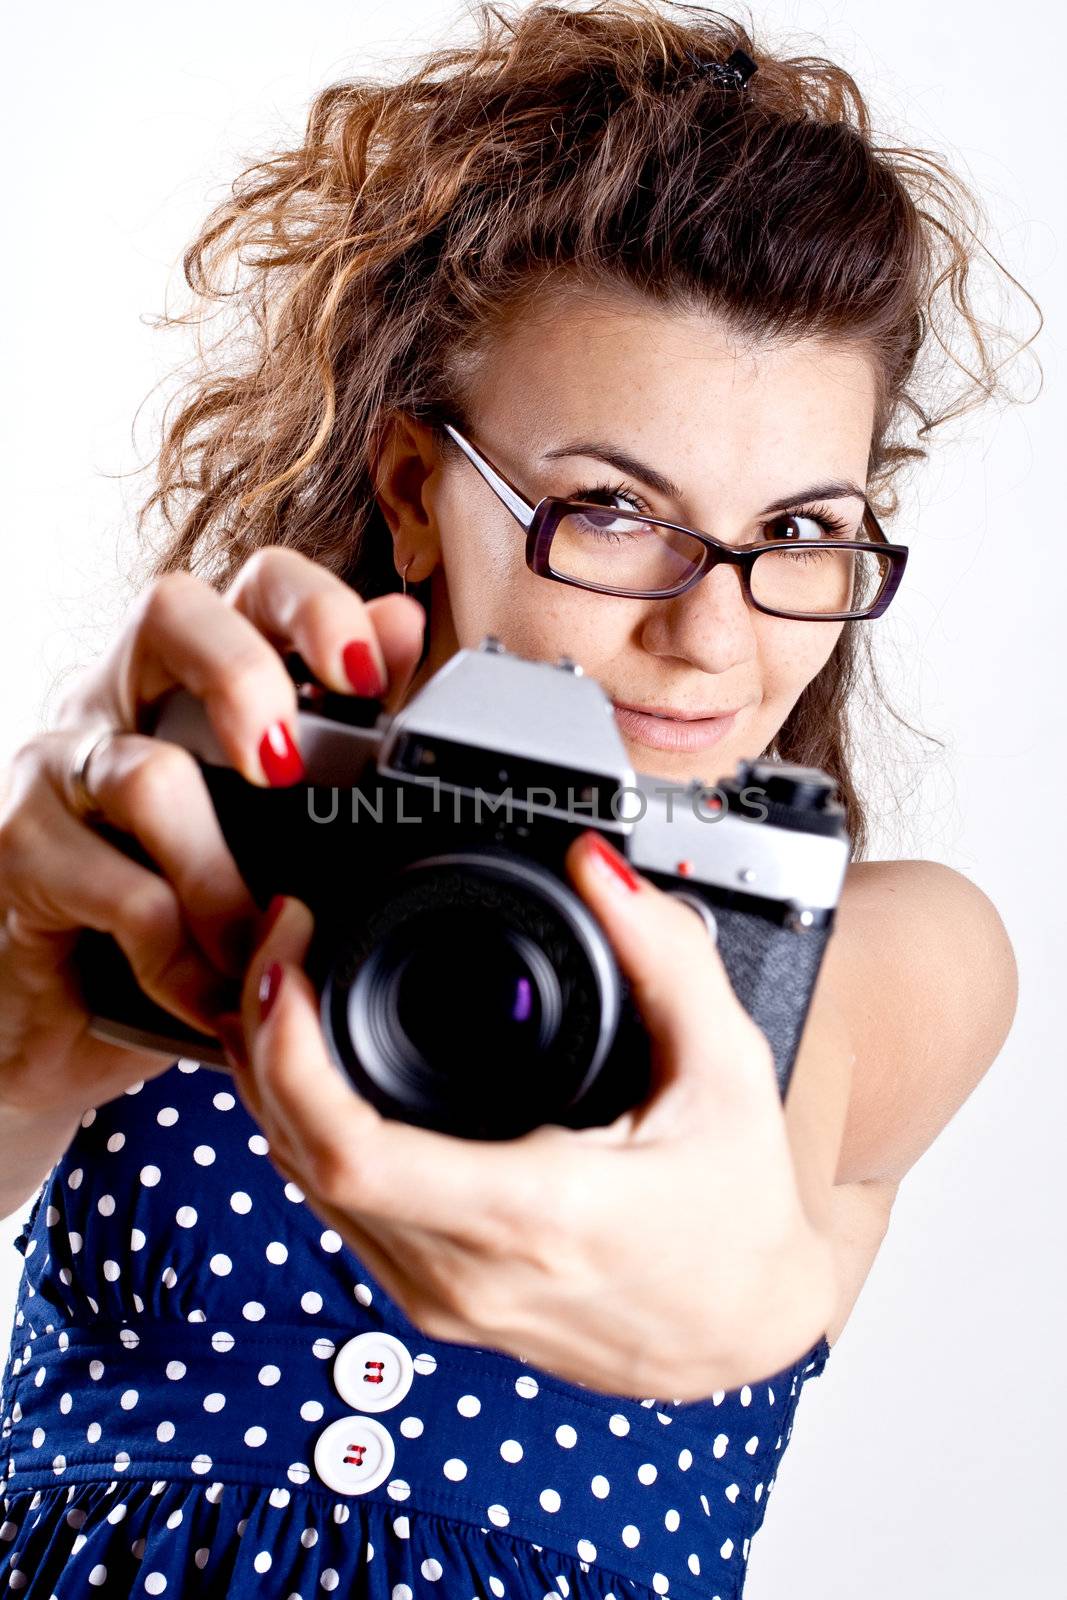 beautiful woman in a blue polka dot dress with camera by Lupen